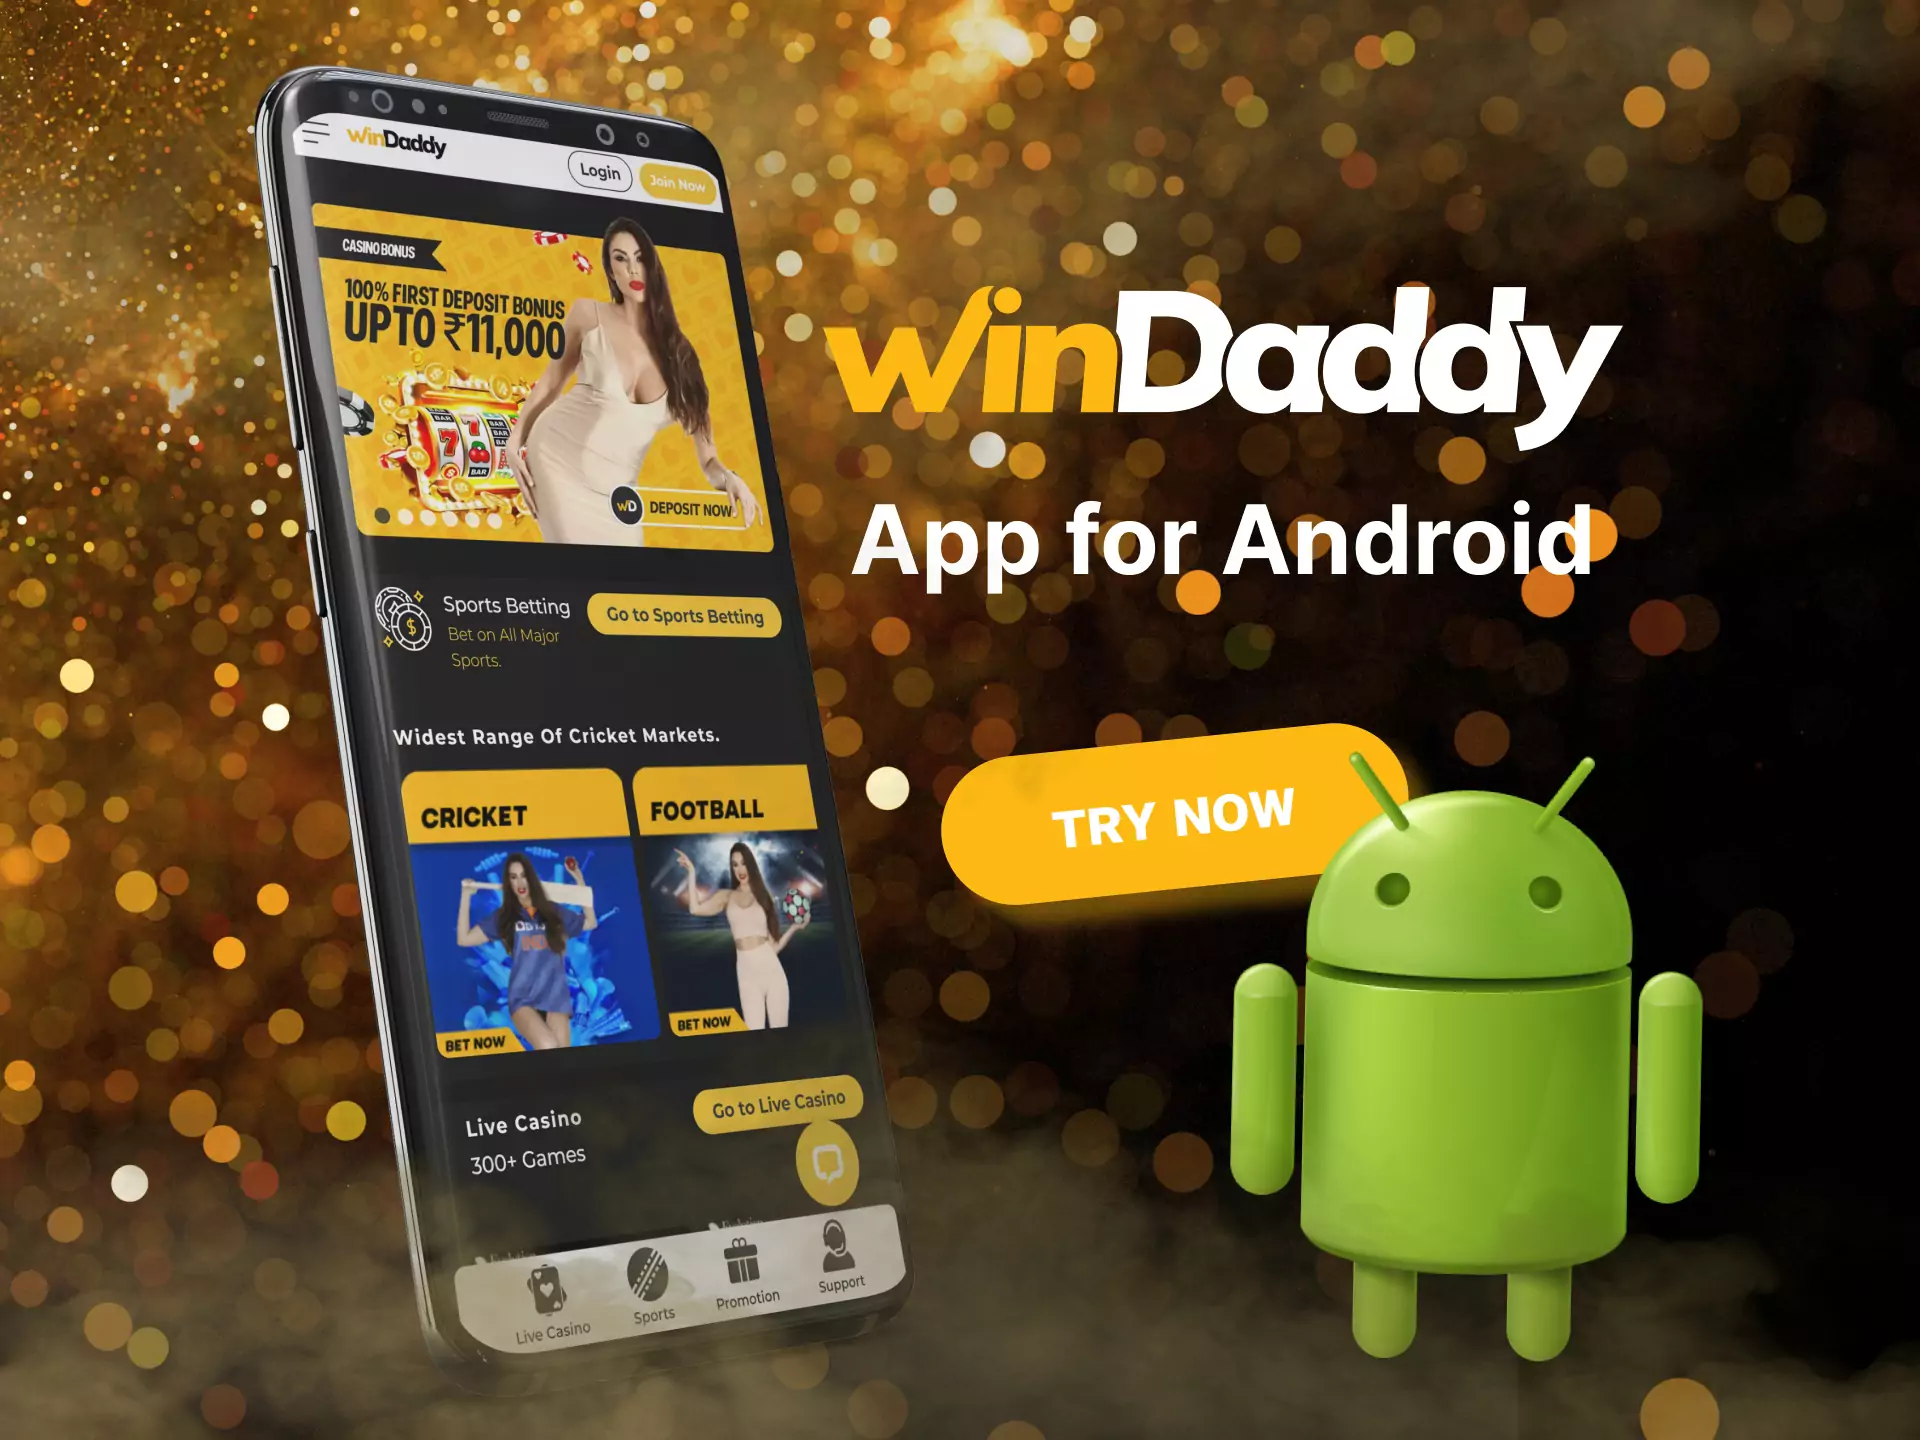 Enjoy a convenient mobile version of Windaddy on Android devices.